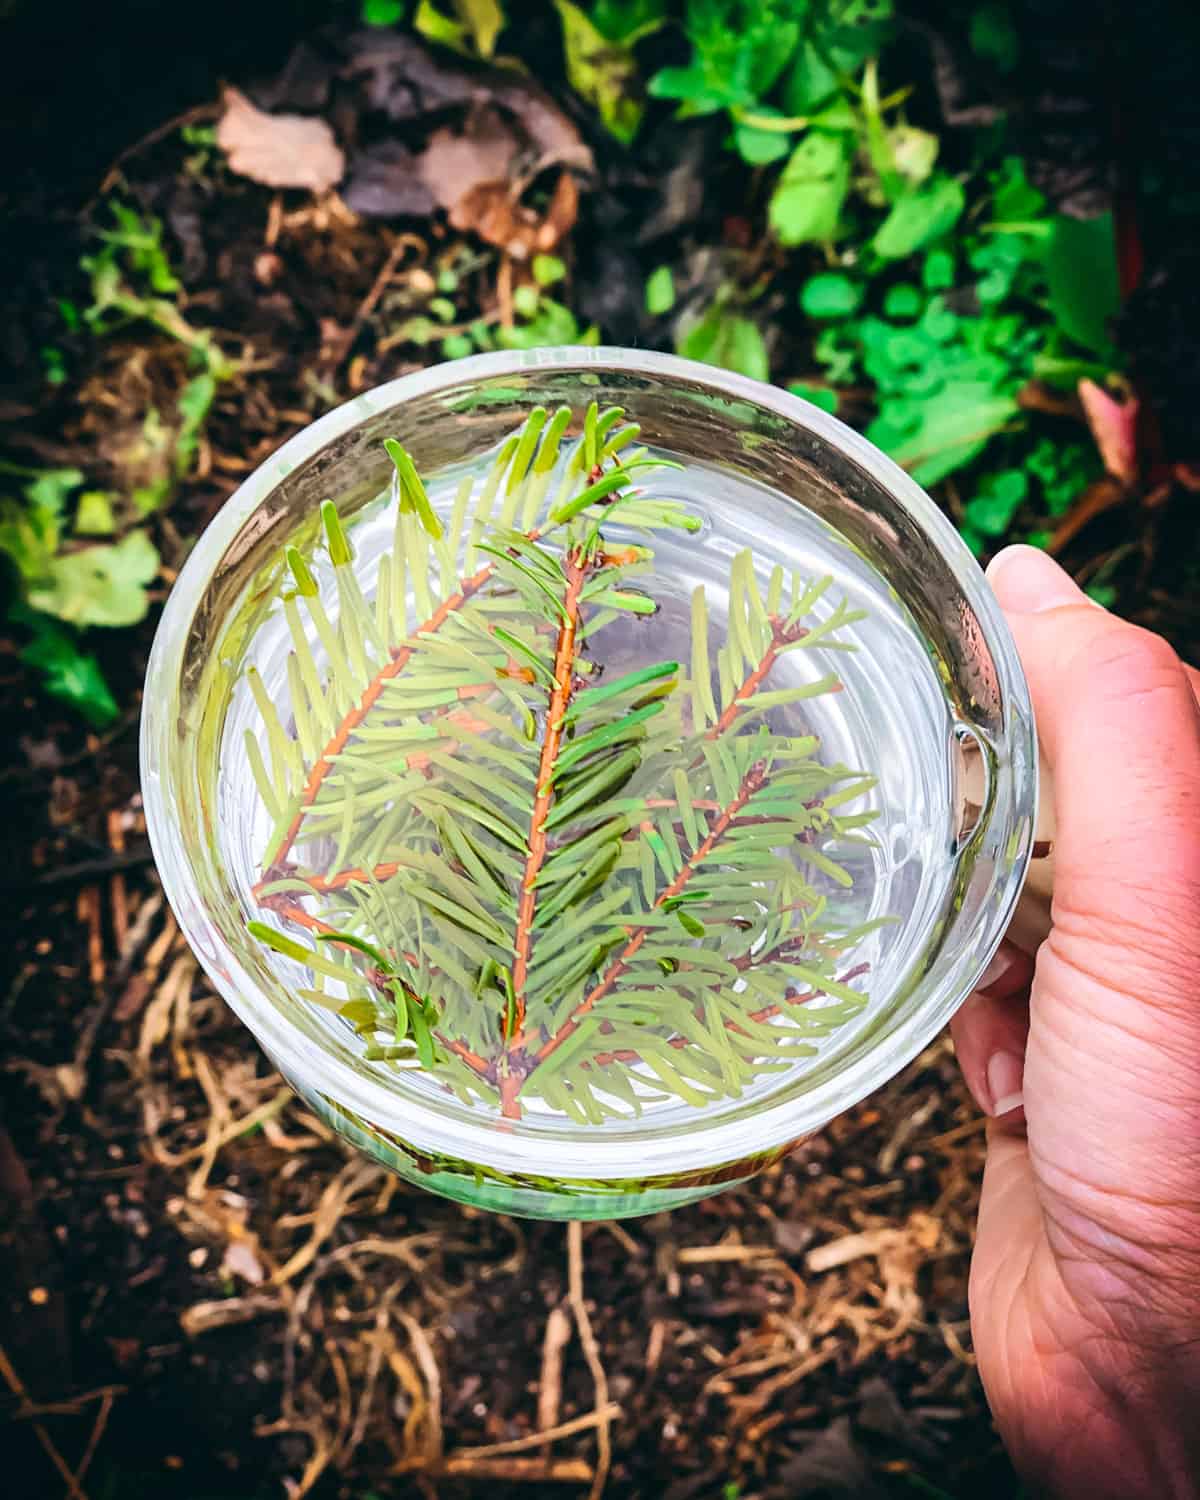 Top view of a clear mug filled with water with fir needle twigs floating at the top, held by a hand on the right. Background is earthy colored dirt and some greens growing. 